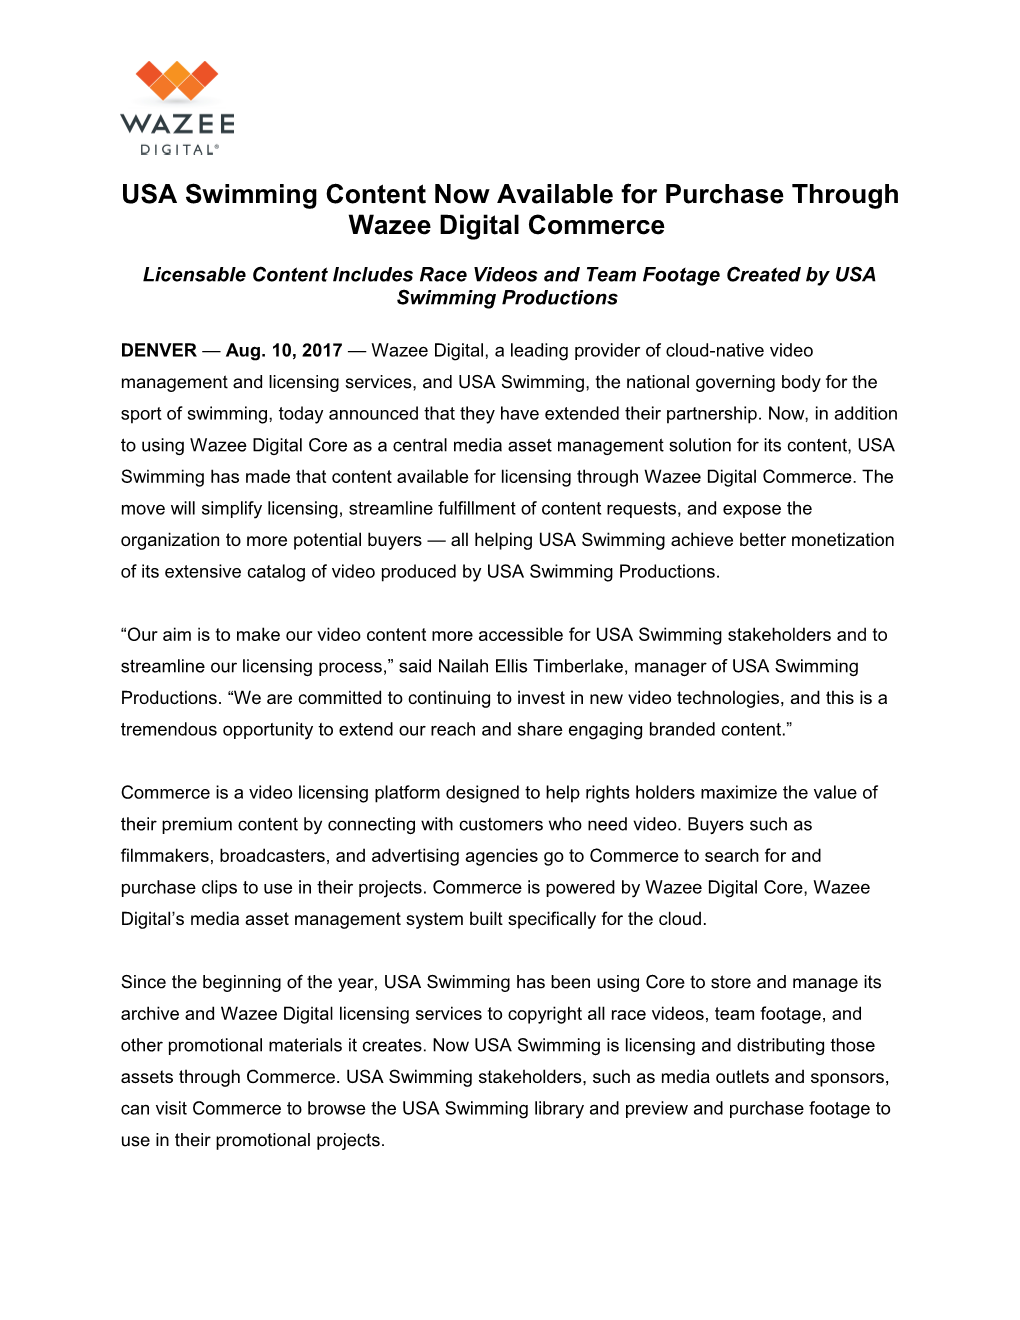 USA Swimming Content Now Available for Purchase Through Wazee Digital Commerce